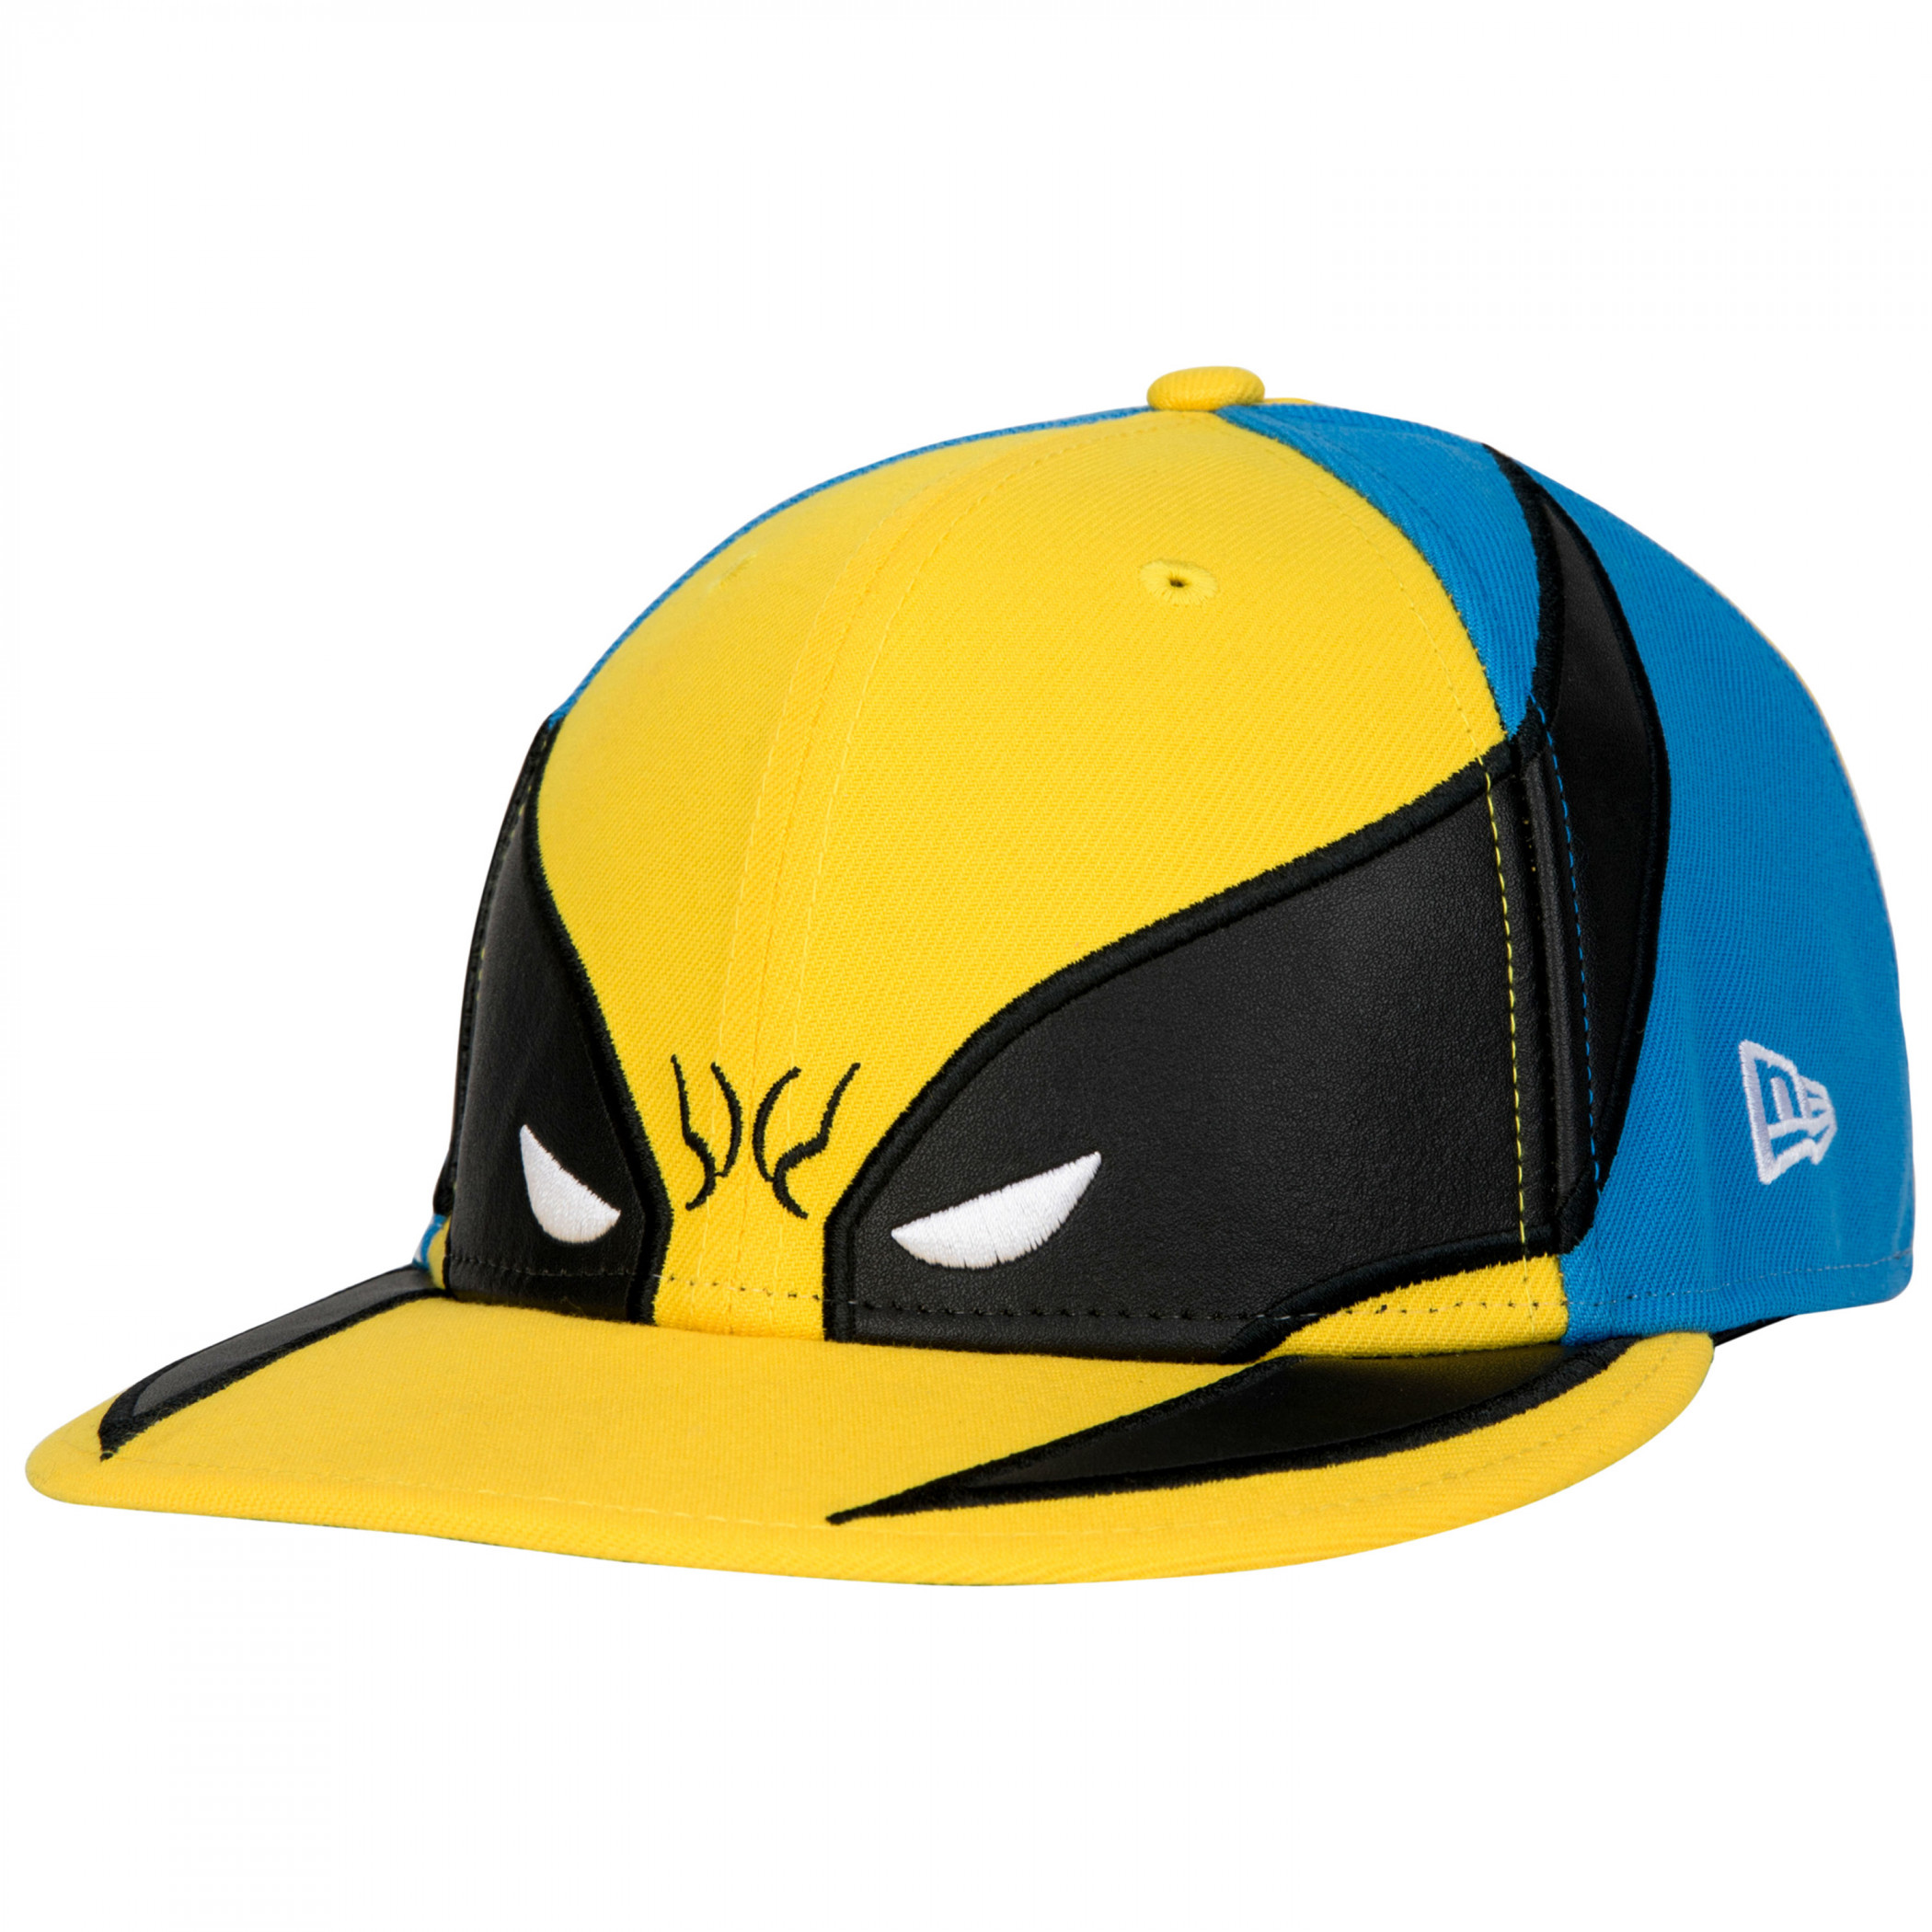 Wolverine '97 Character Armor New Era 59Fifty Fitted Hat - Limited Edition